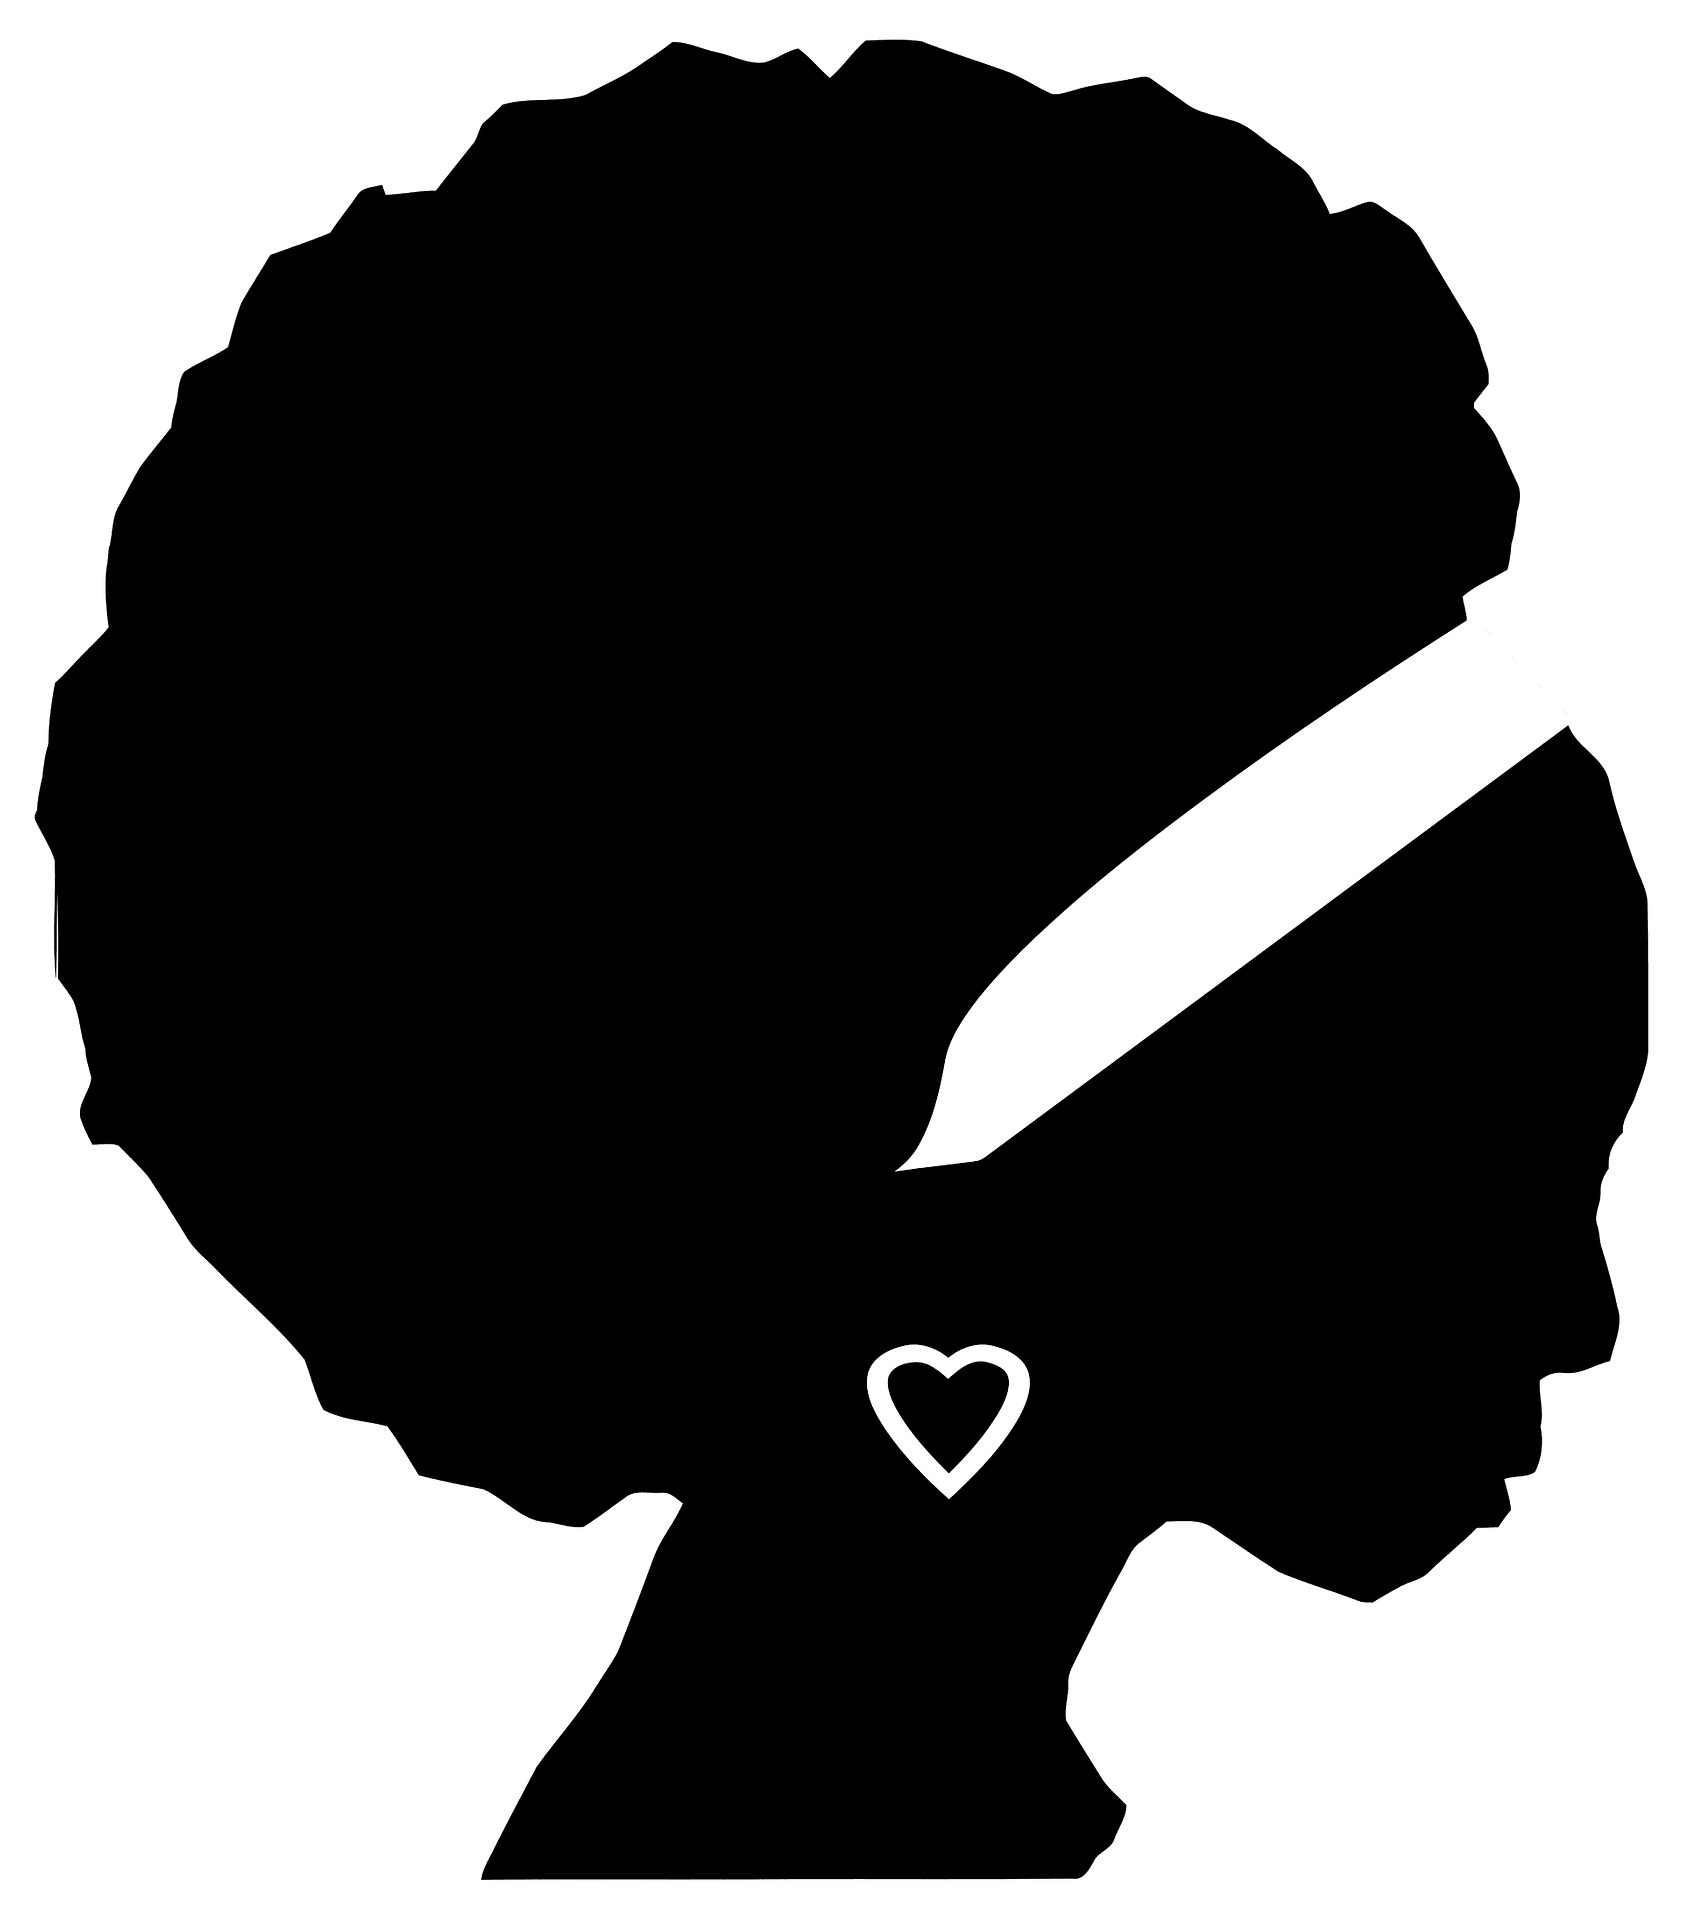 Woman Silhouette Vectors | Free Illustrations, Drawings, PNG Clip ...